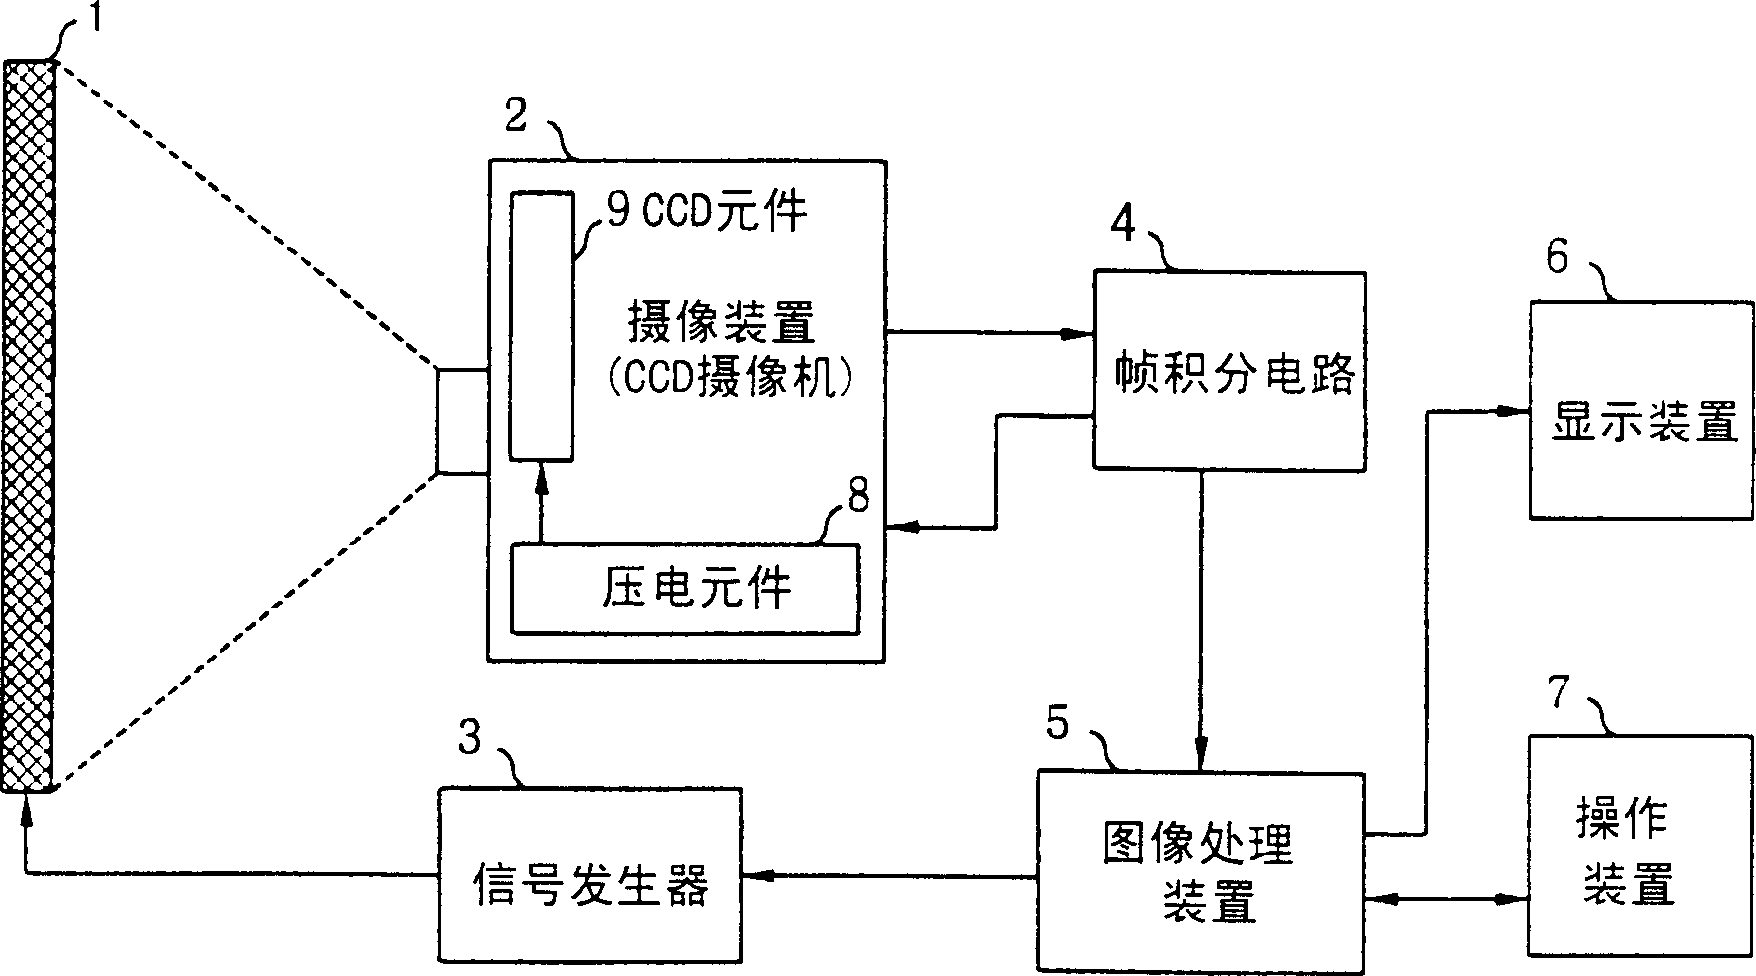 Image quality tester of electronic display device